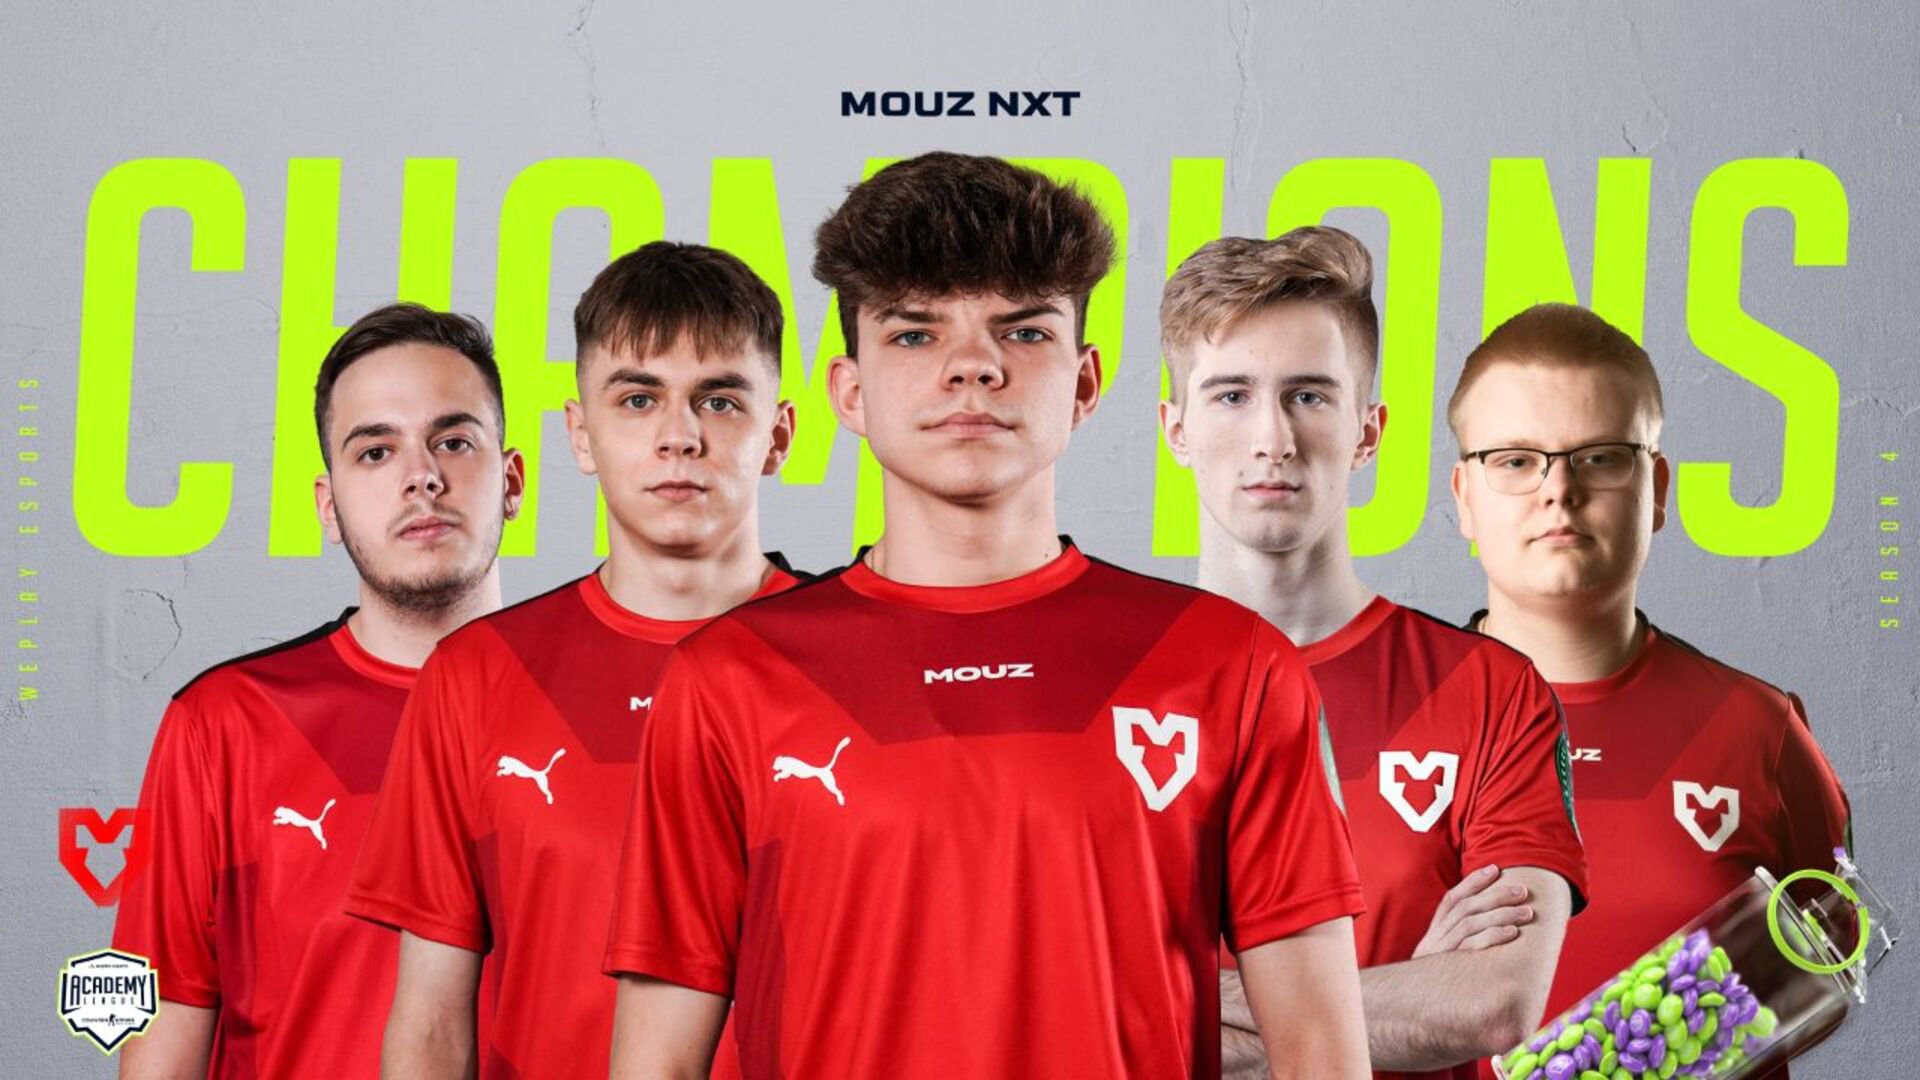 MOUZ NXT becomes the winner of WePlay Academy League Season 4. Visual: WePlay Holding